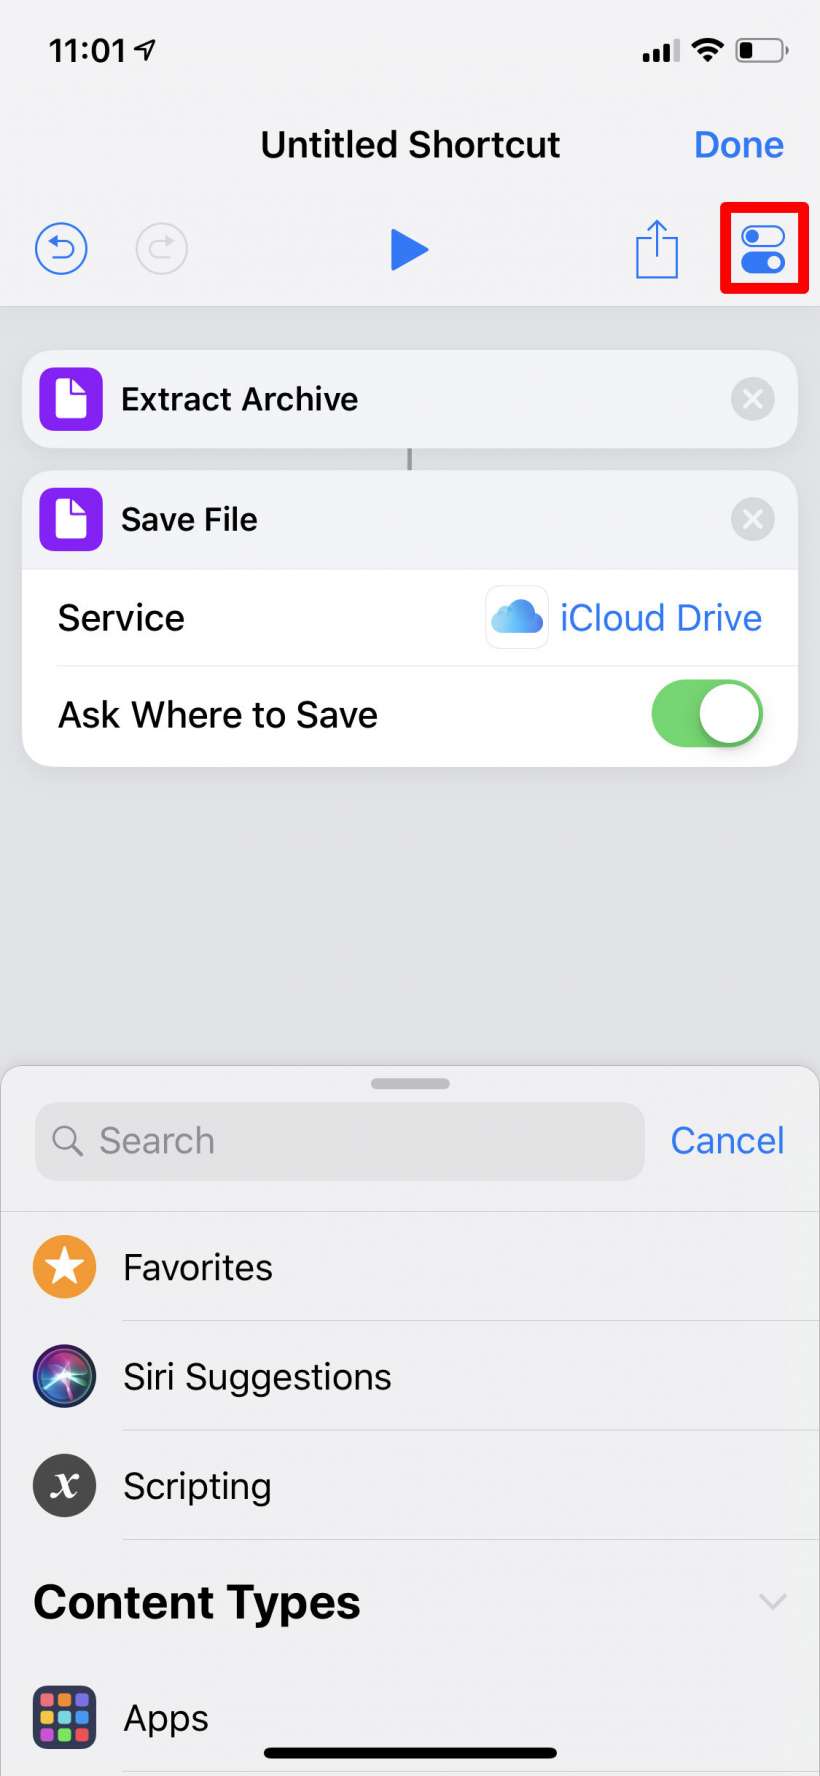 view zip file on iphone